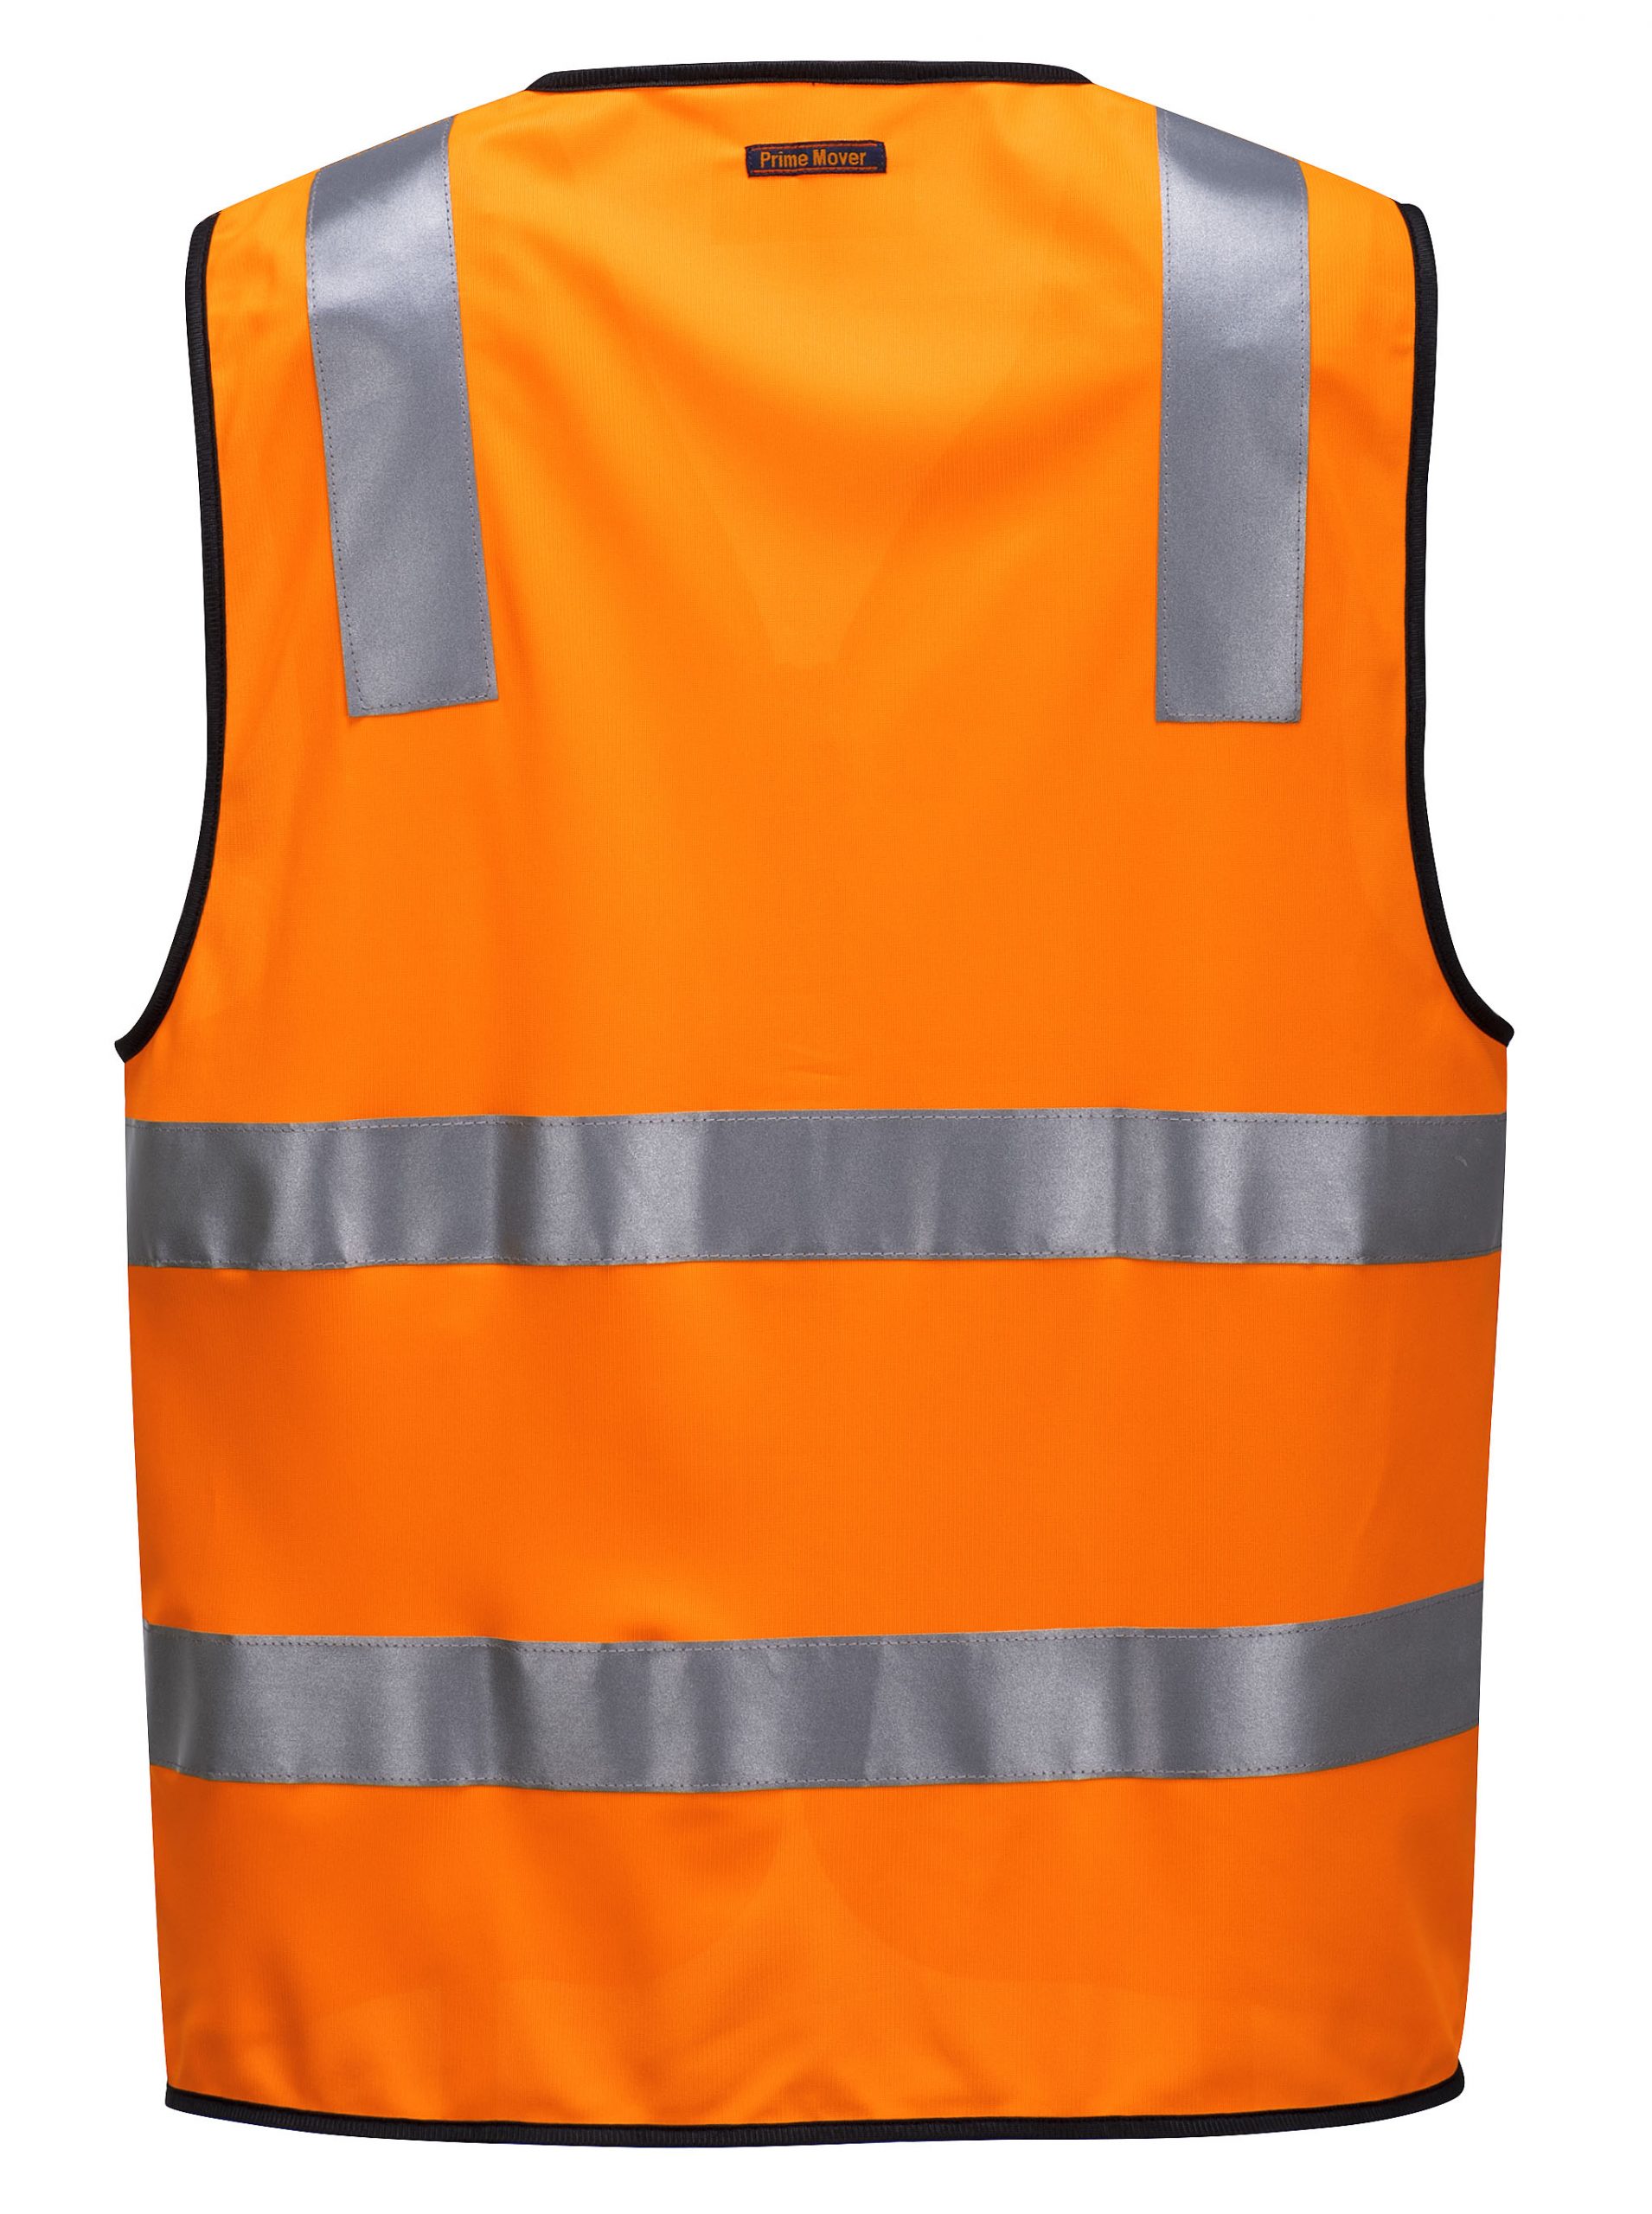 MZ102 Day/Night Safety Vest with Tape with Zip O2